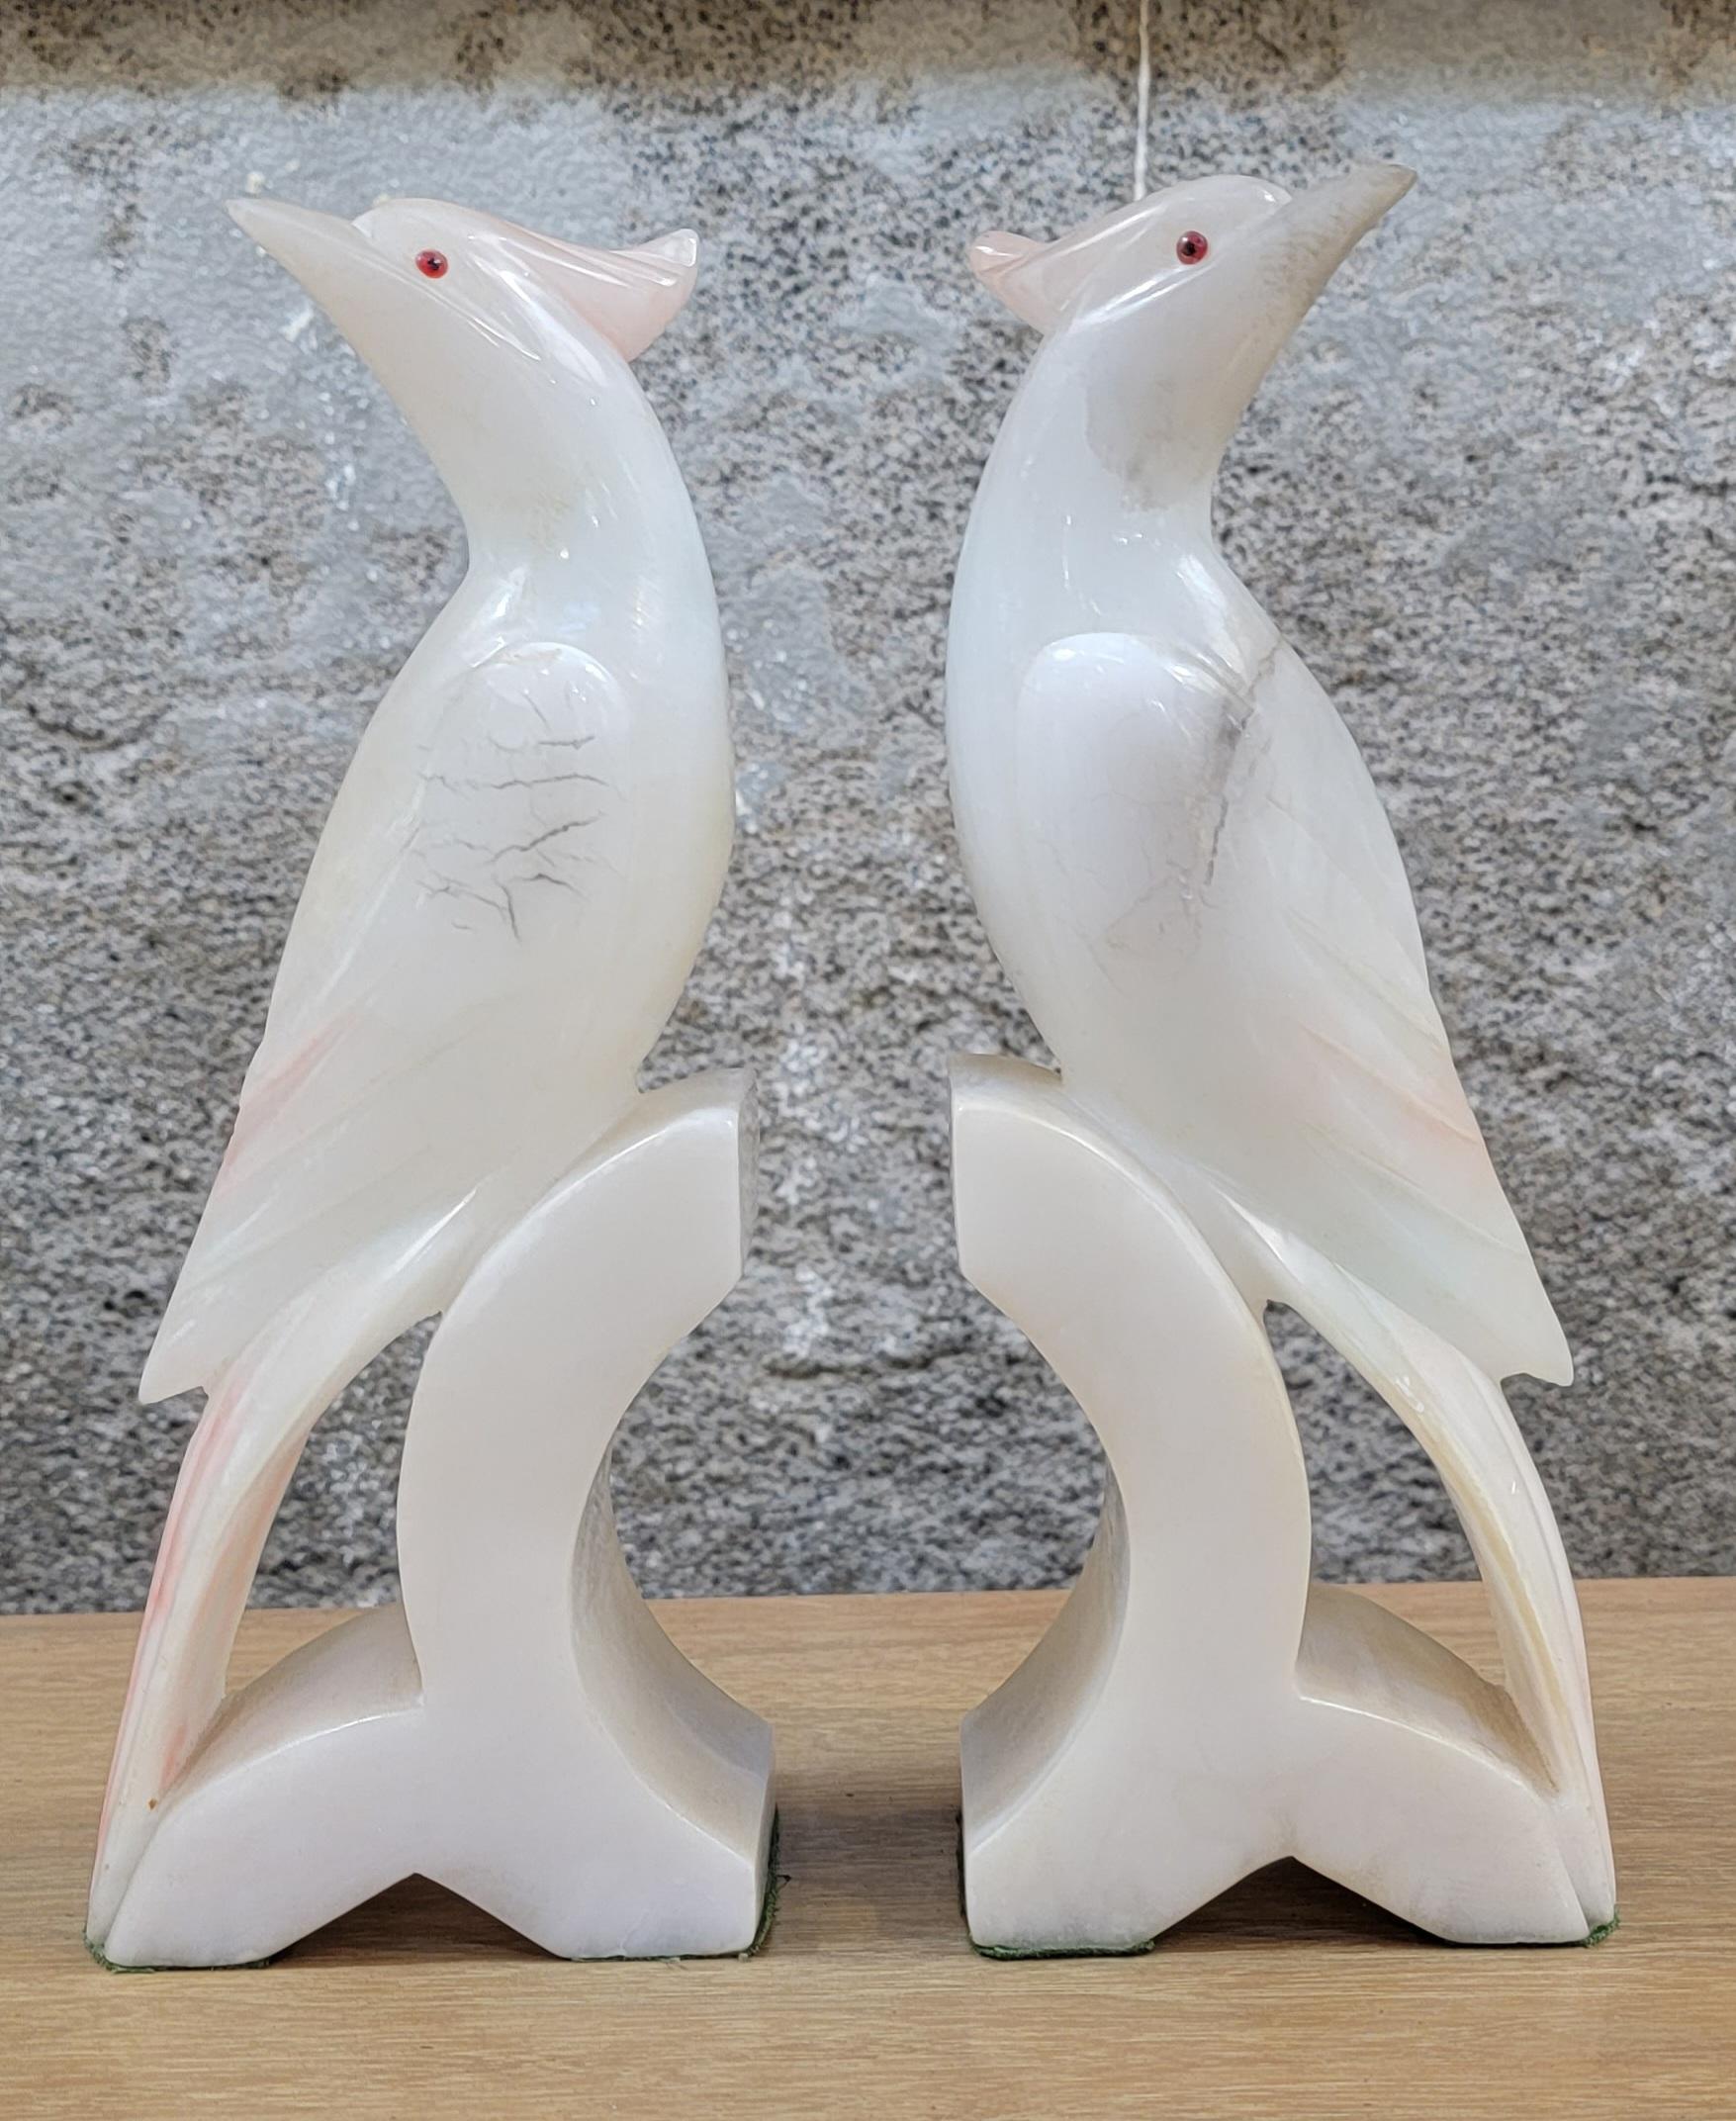 A pair of carved alabaster Cockatoo bird bookends. White, black and pink marbleized alabaster. Each bookend measures 9.5 inches tall, 3.75 inches wide, 2.25 inches deep.